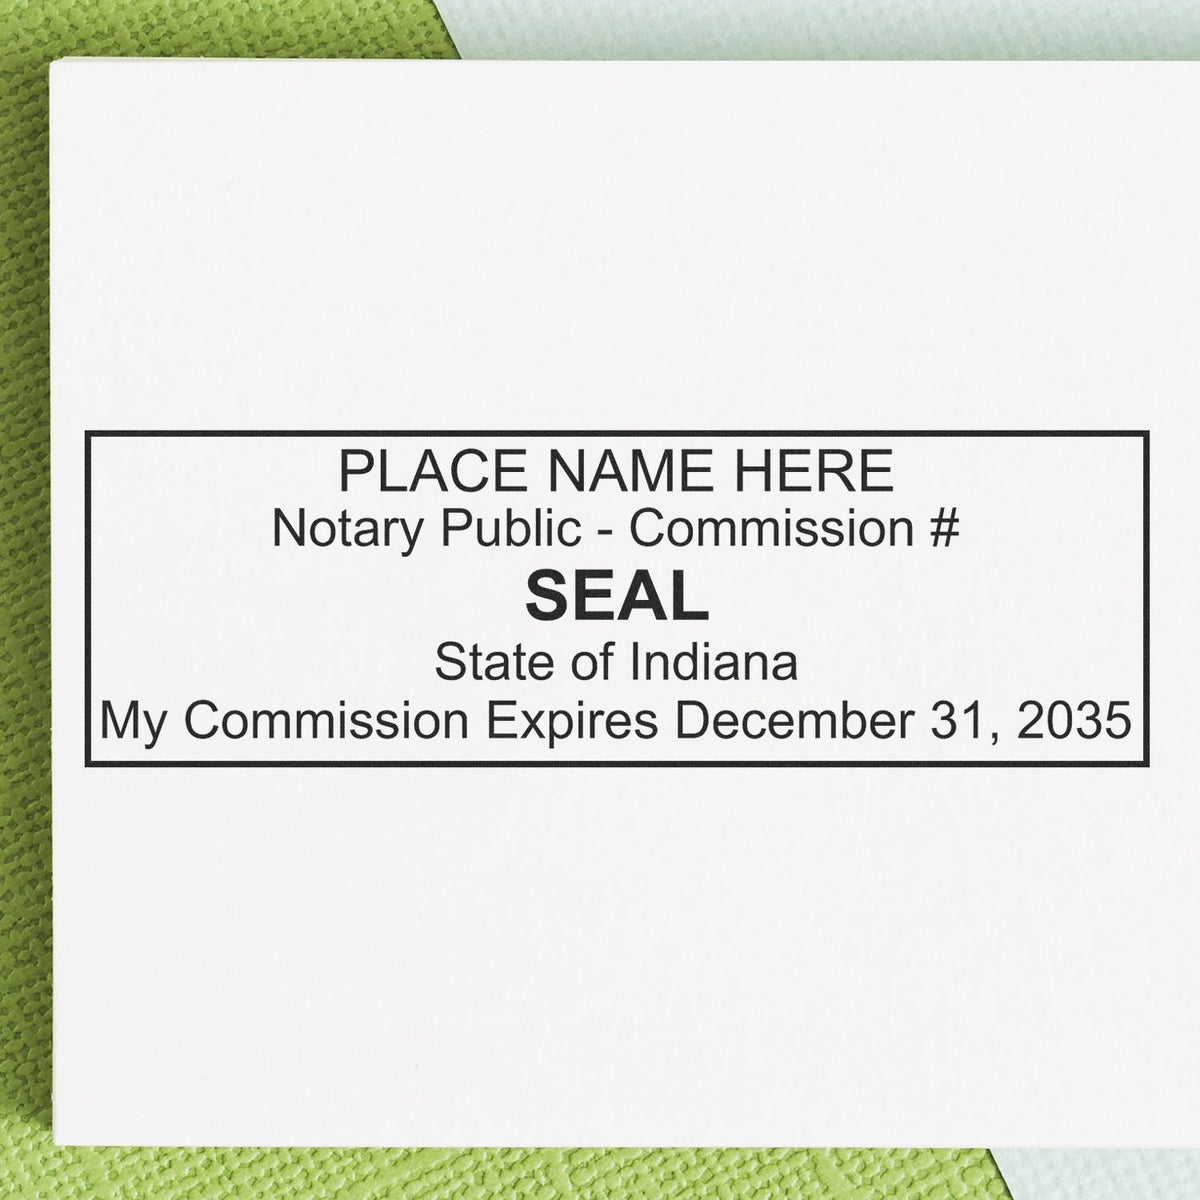 A lifestyle photo showing a stamped image of the Heavy-Duty Indiana Rectangular Notary Stamp on a piece of paper